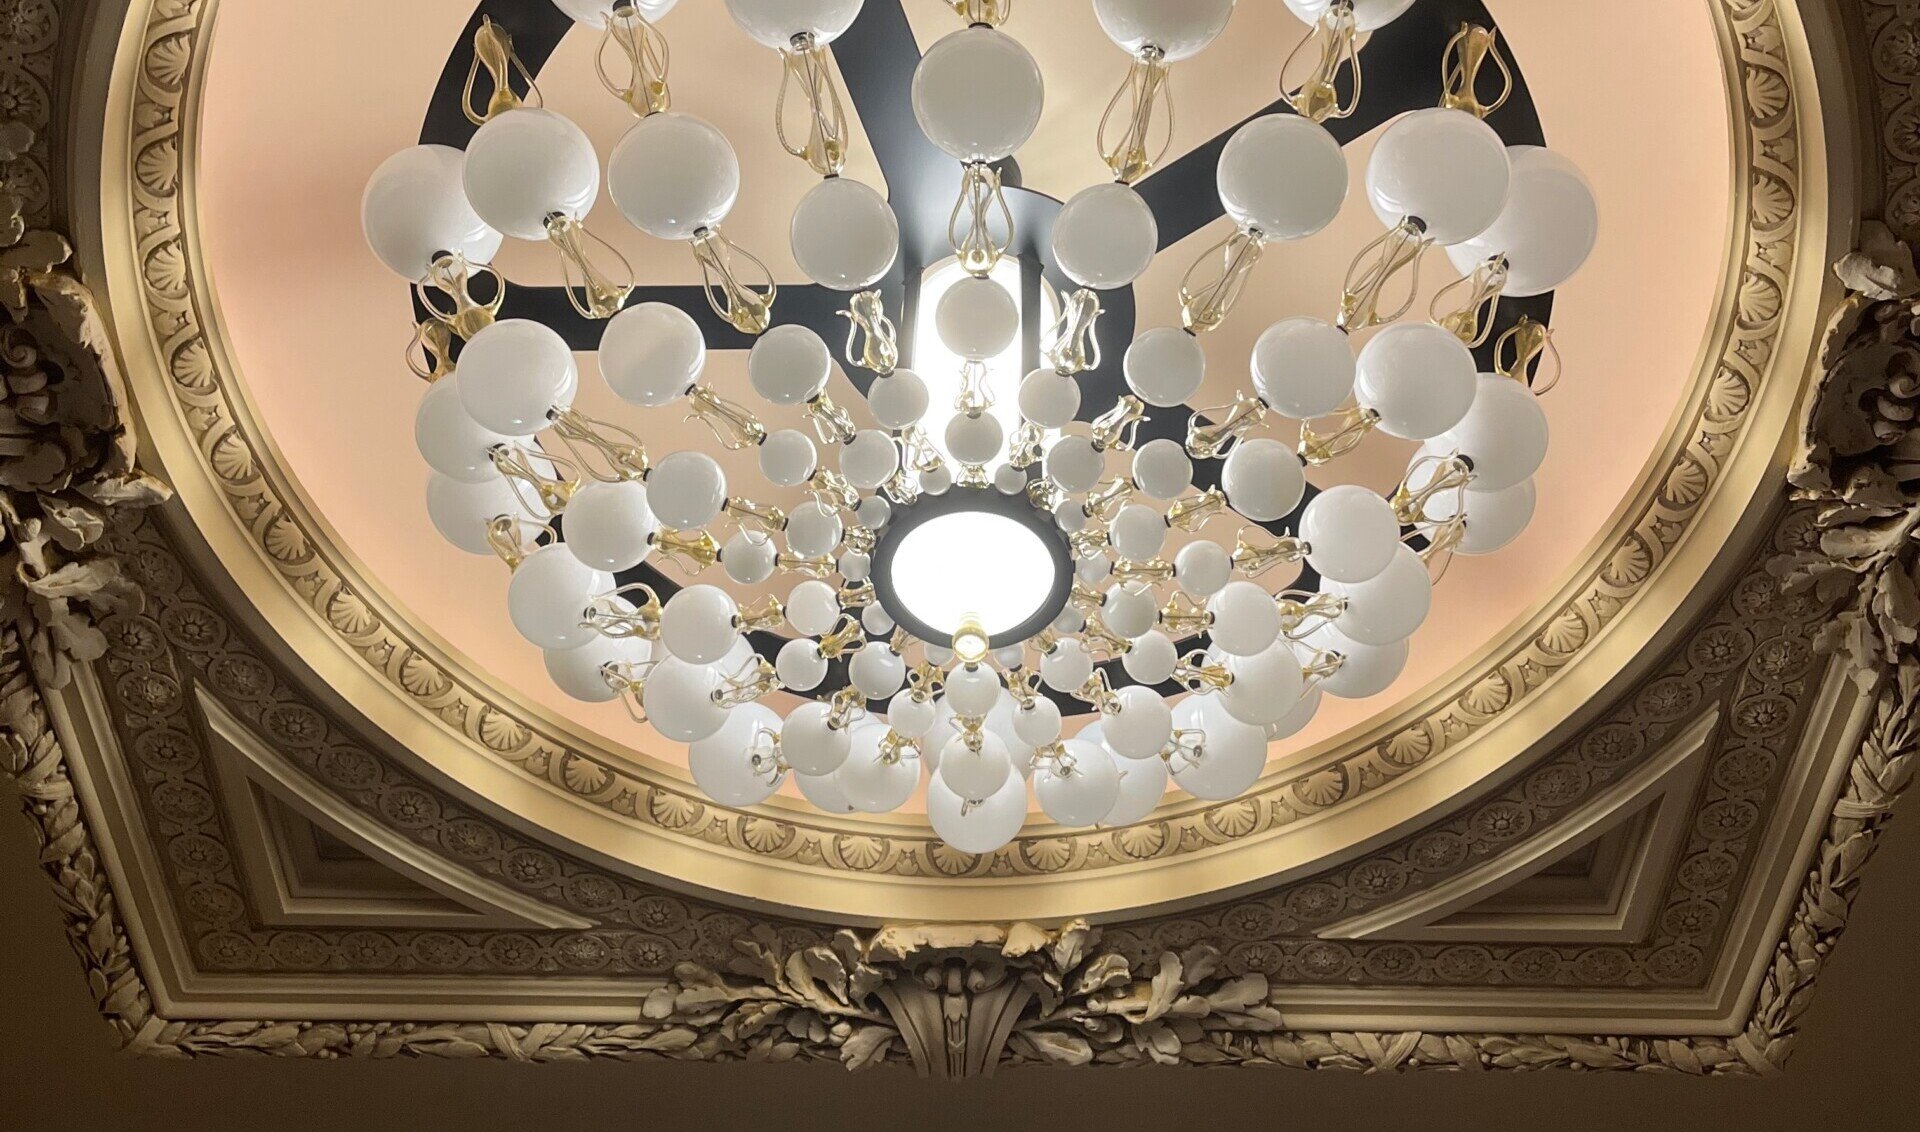 Belger Arts and Kansas City Museum collaboration chandelier shines light on...